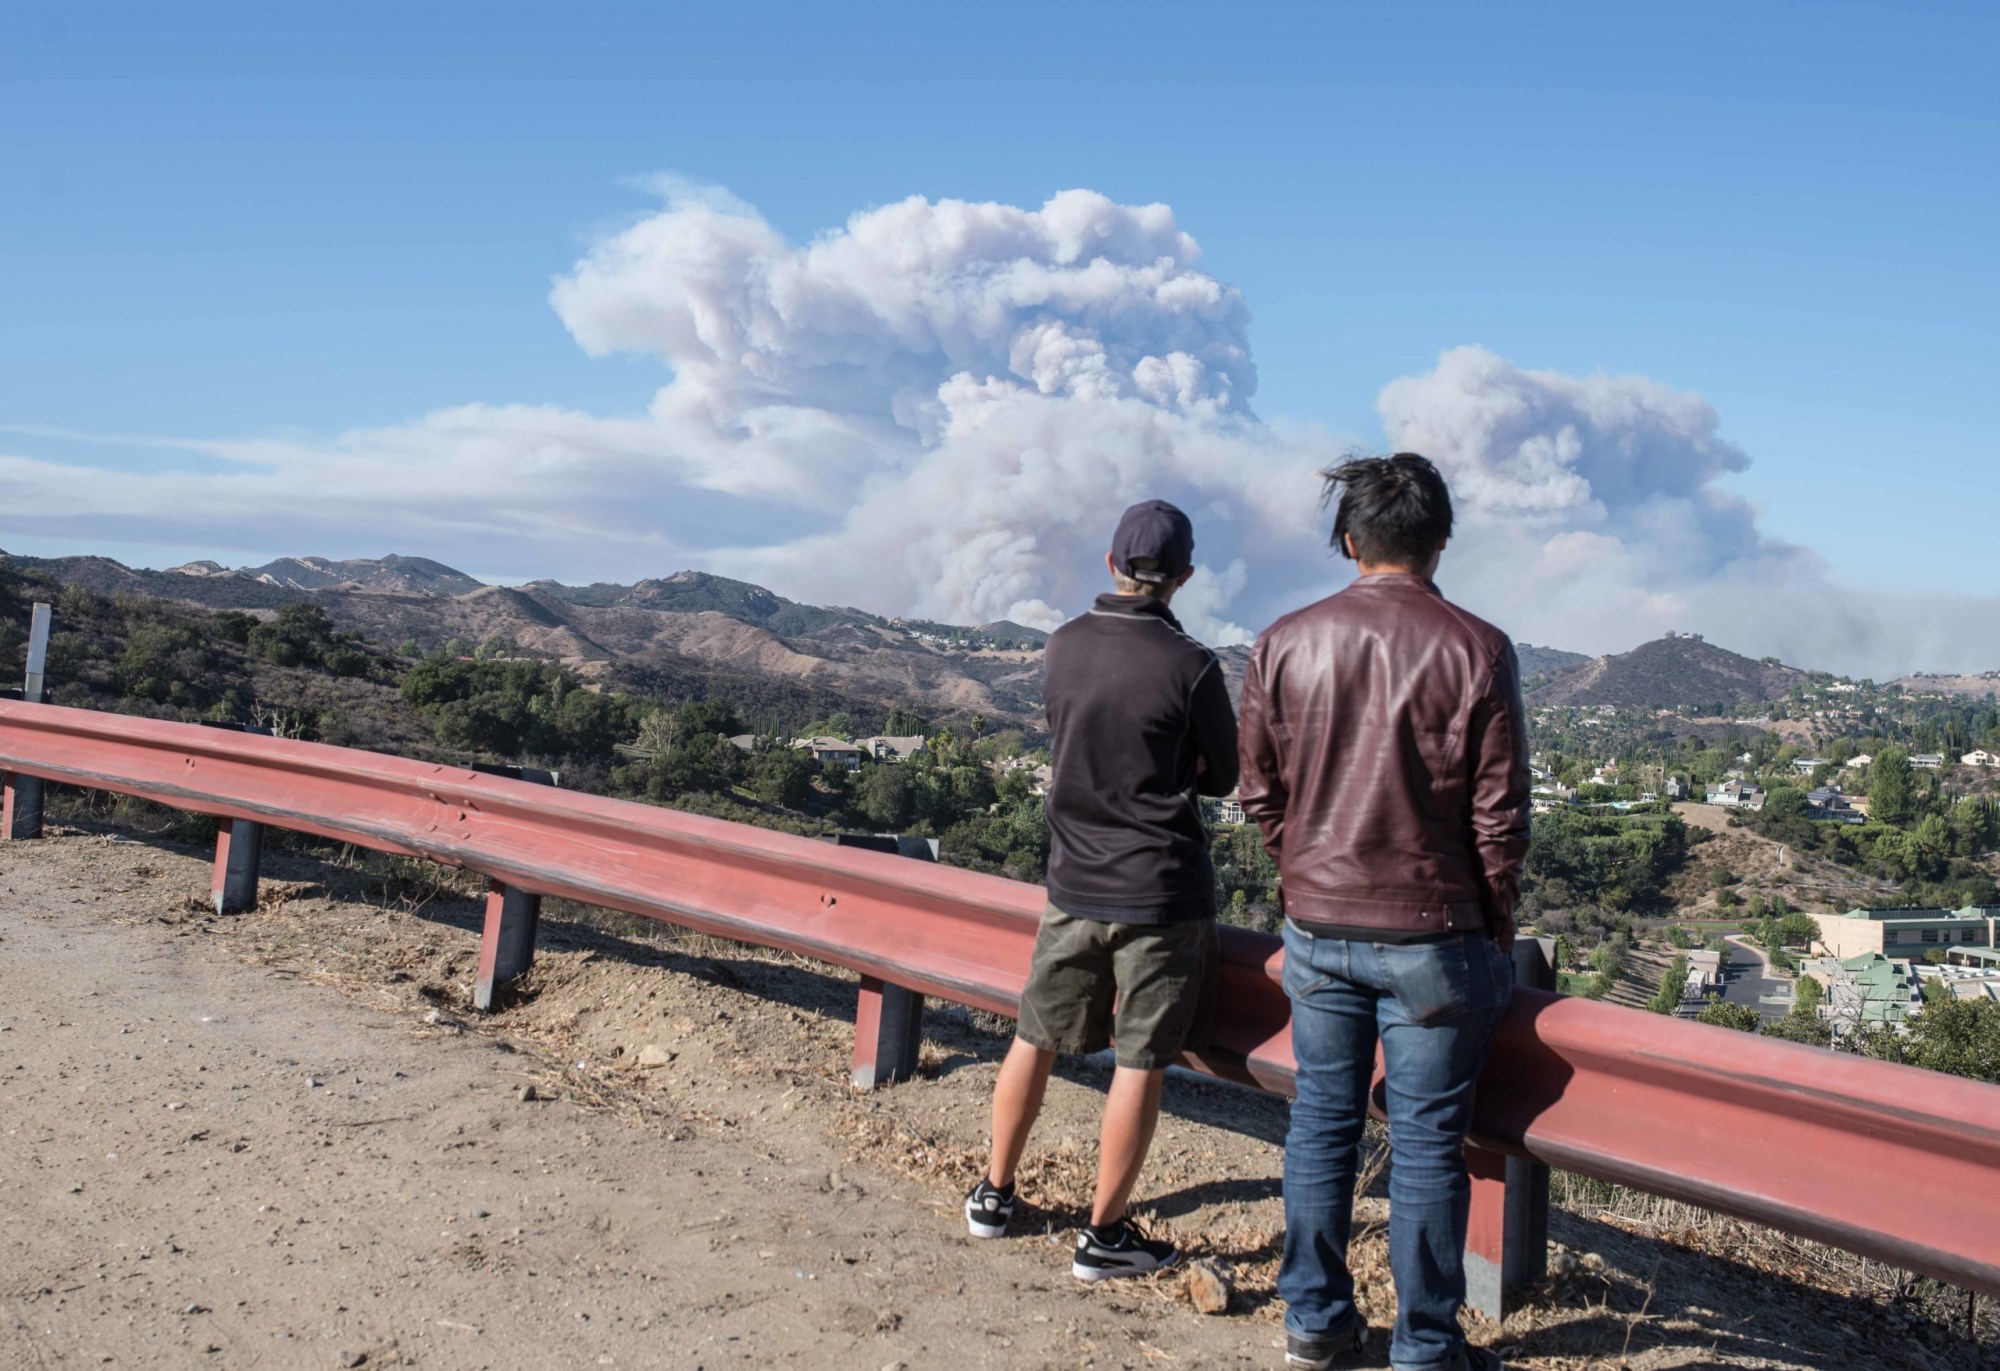 Residents of Topanga, California, seen on standby at Topanga Canyon Road watching the Woolsey Fire in the distance on November 9, 2011. (Getty/ Dawn Bottoms)